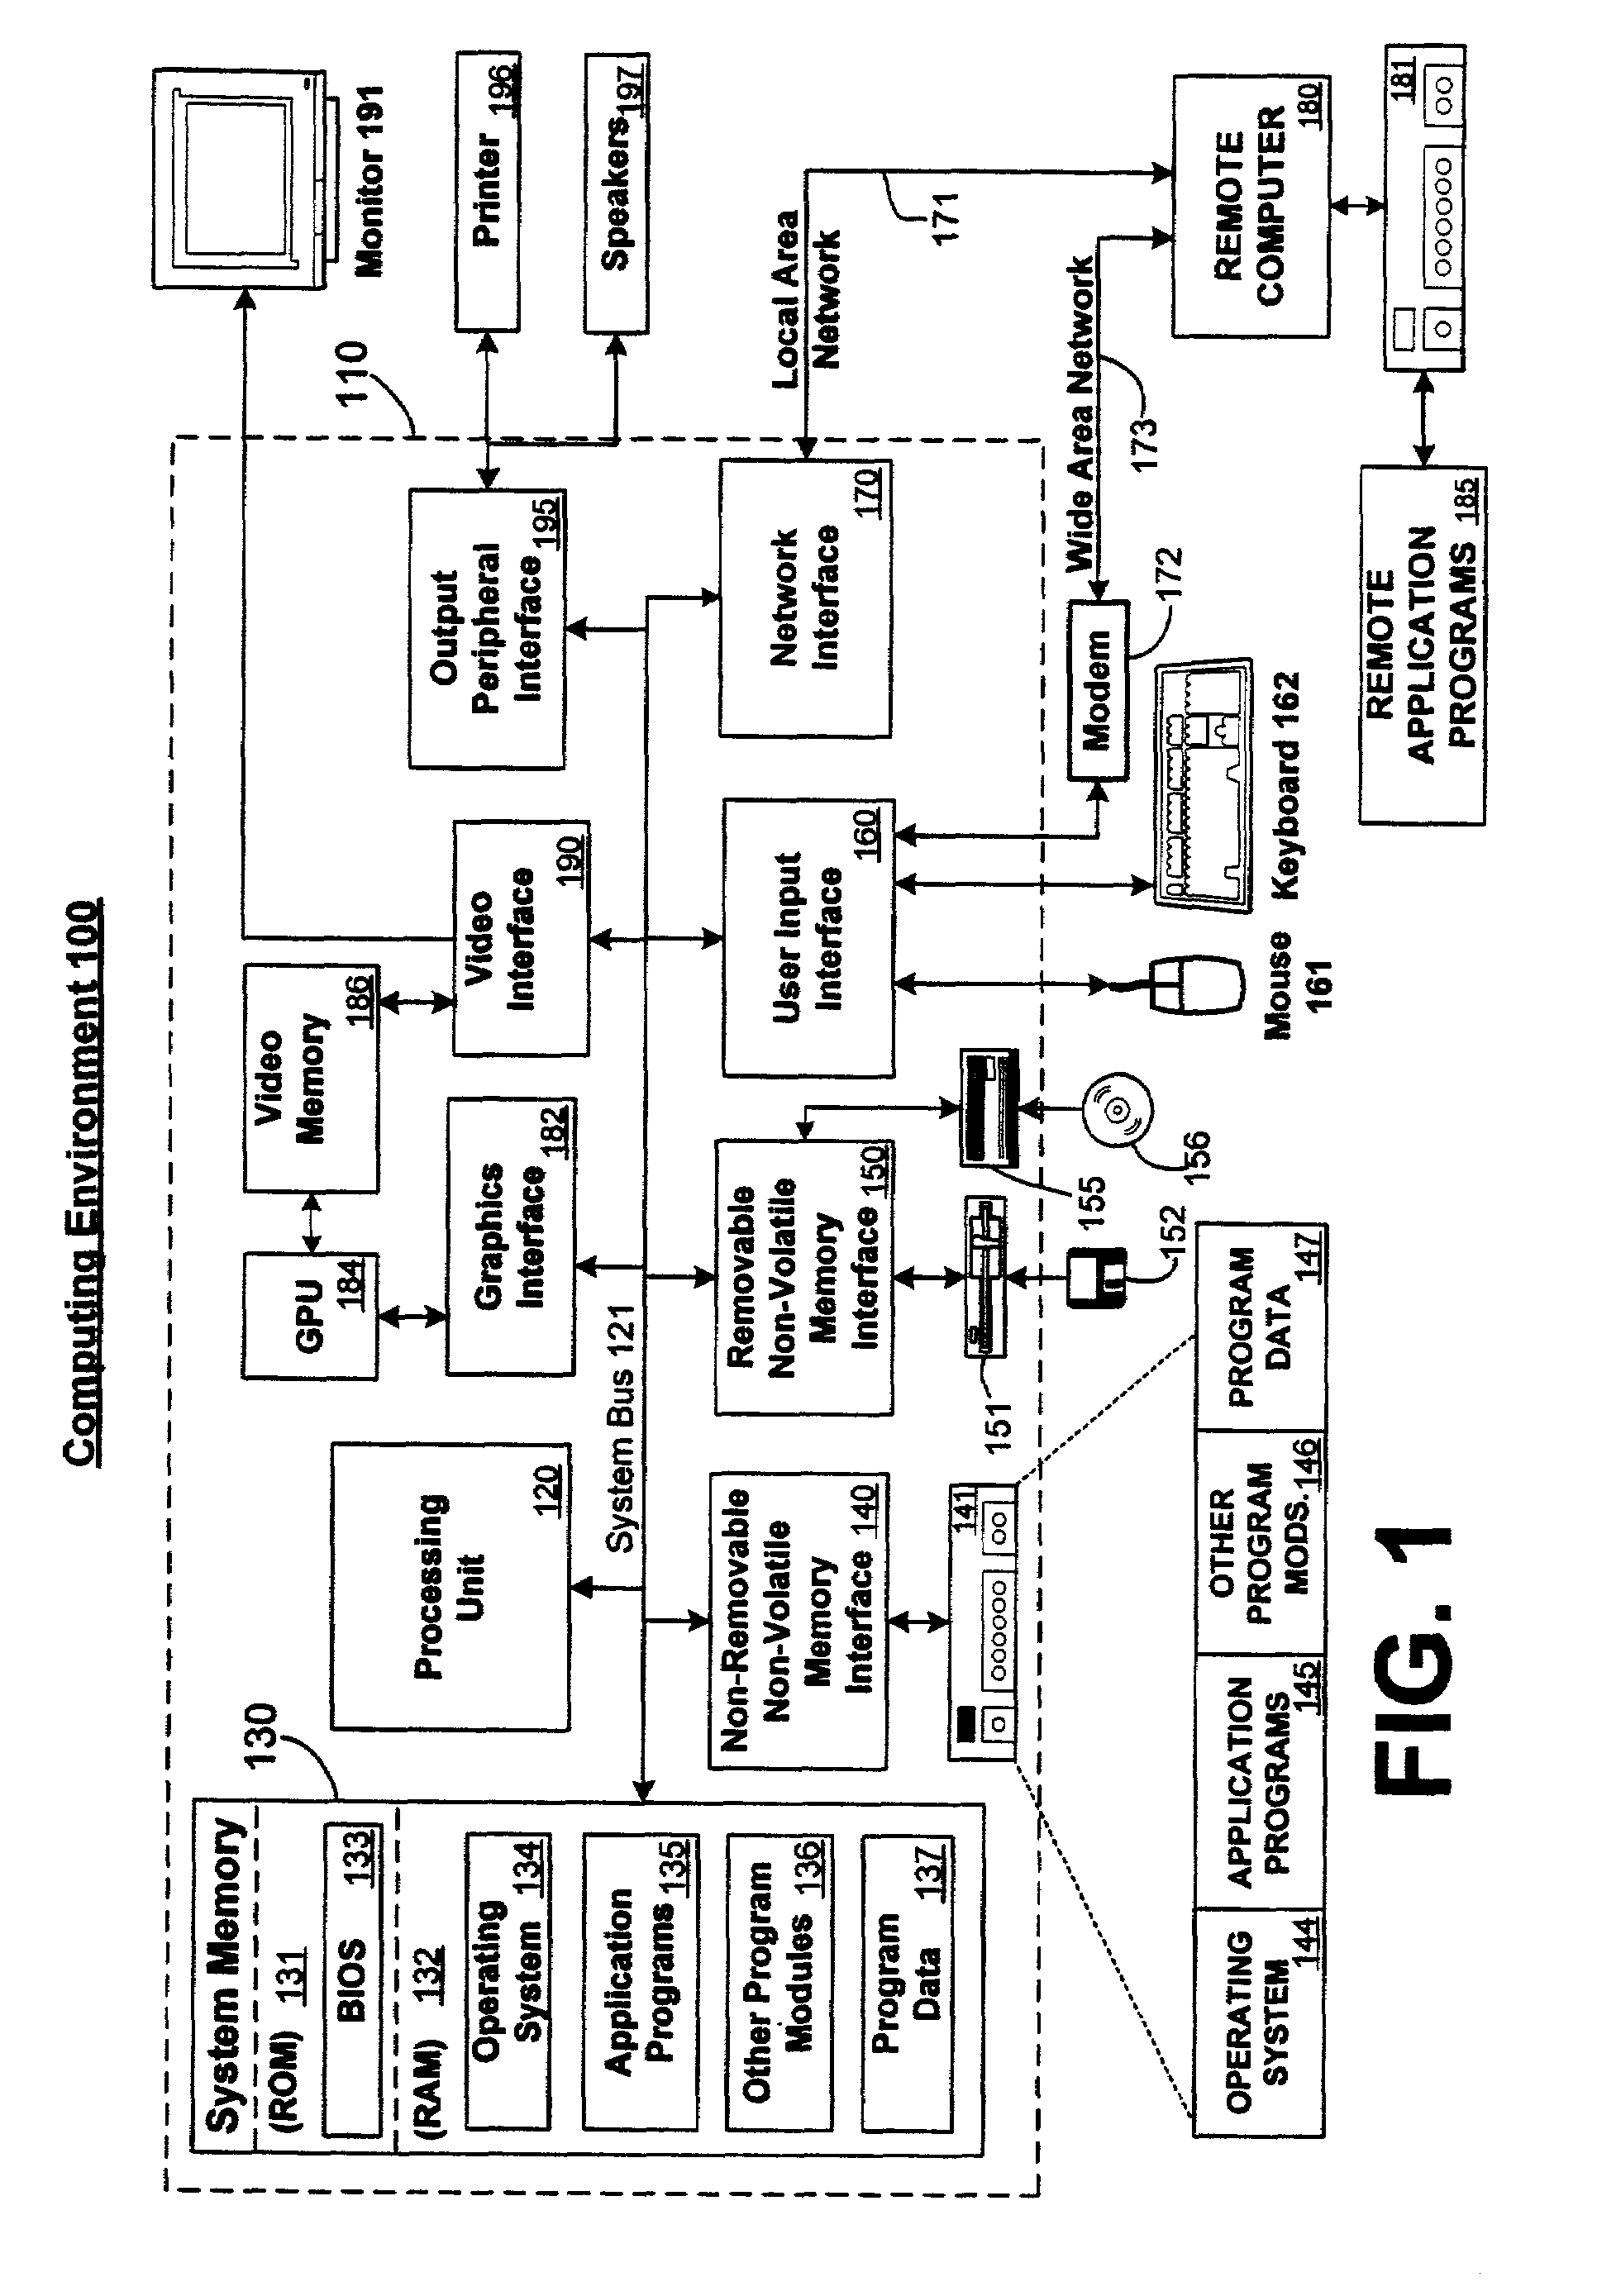 System and method for enhancing XML schemas